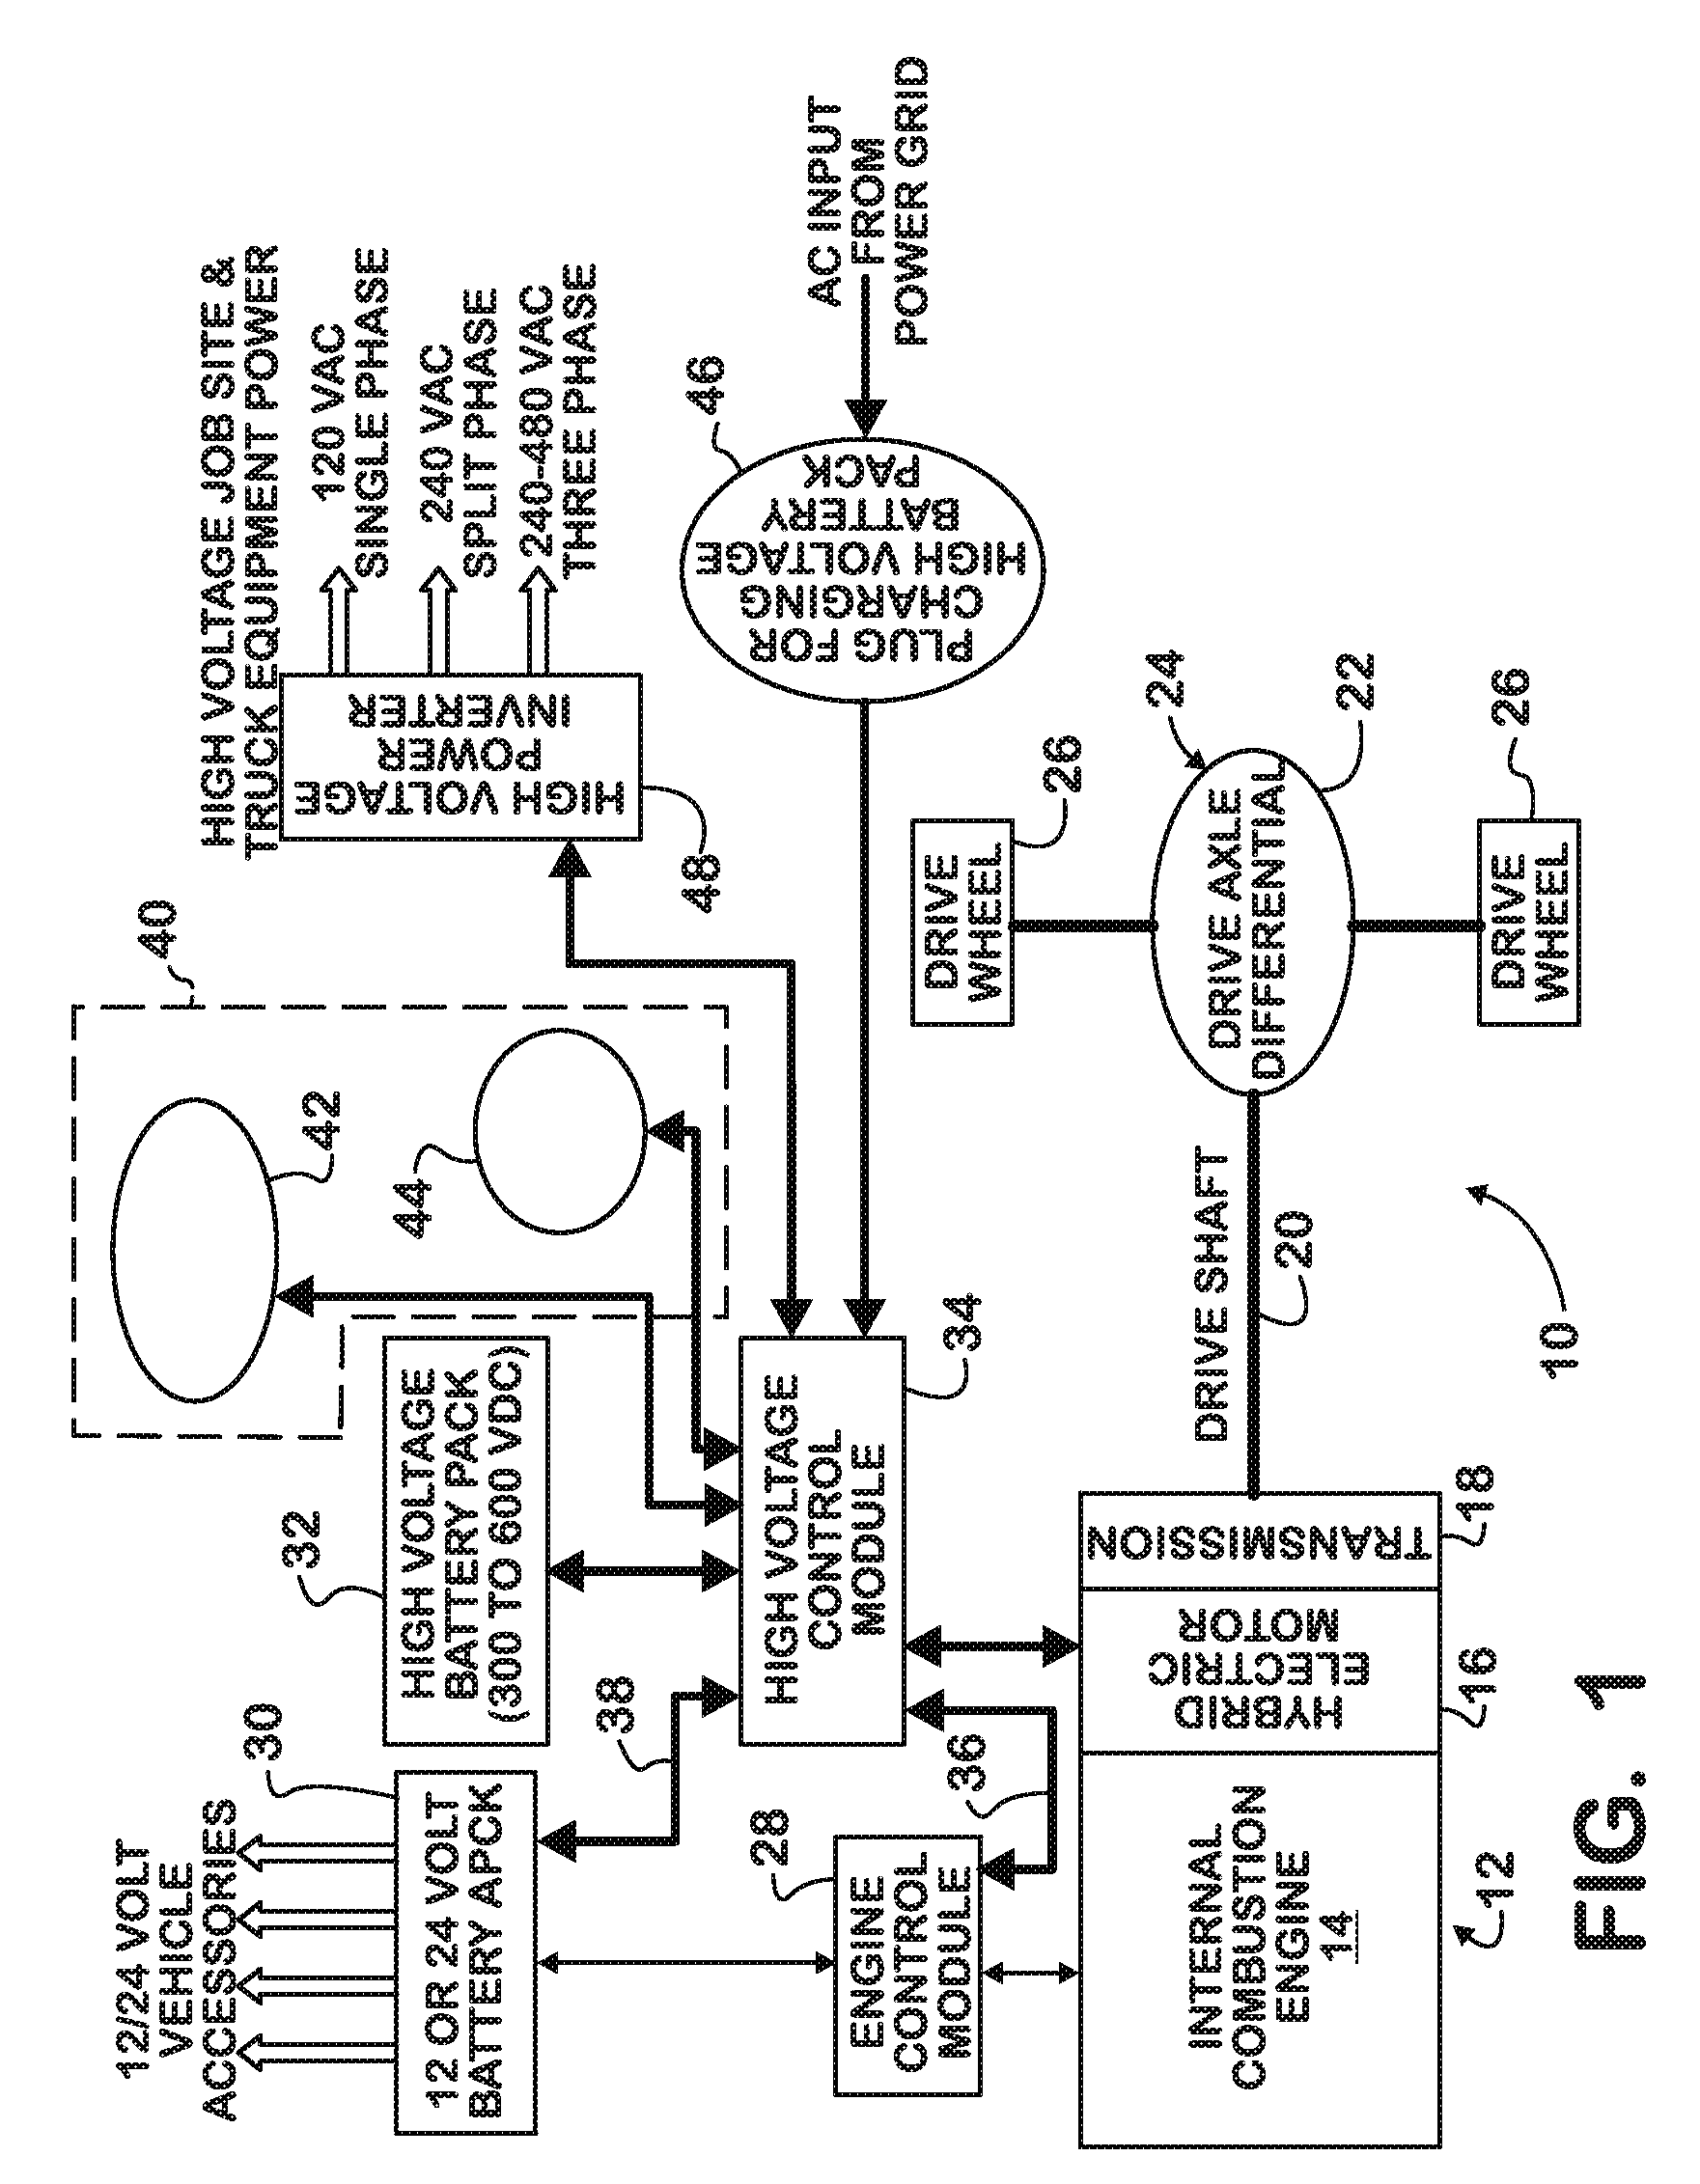 Battery pack management strategy in a hybrid electric motor vehicle